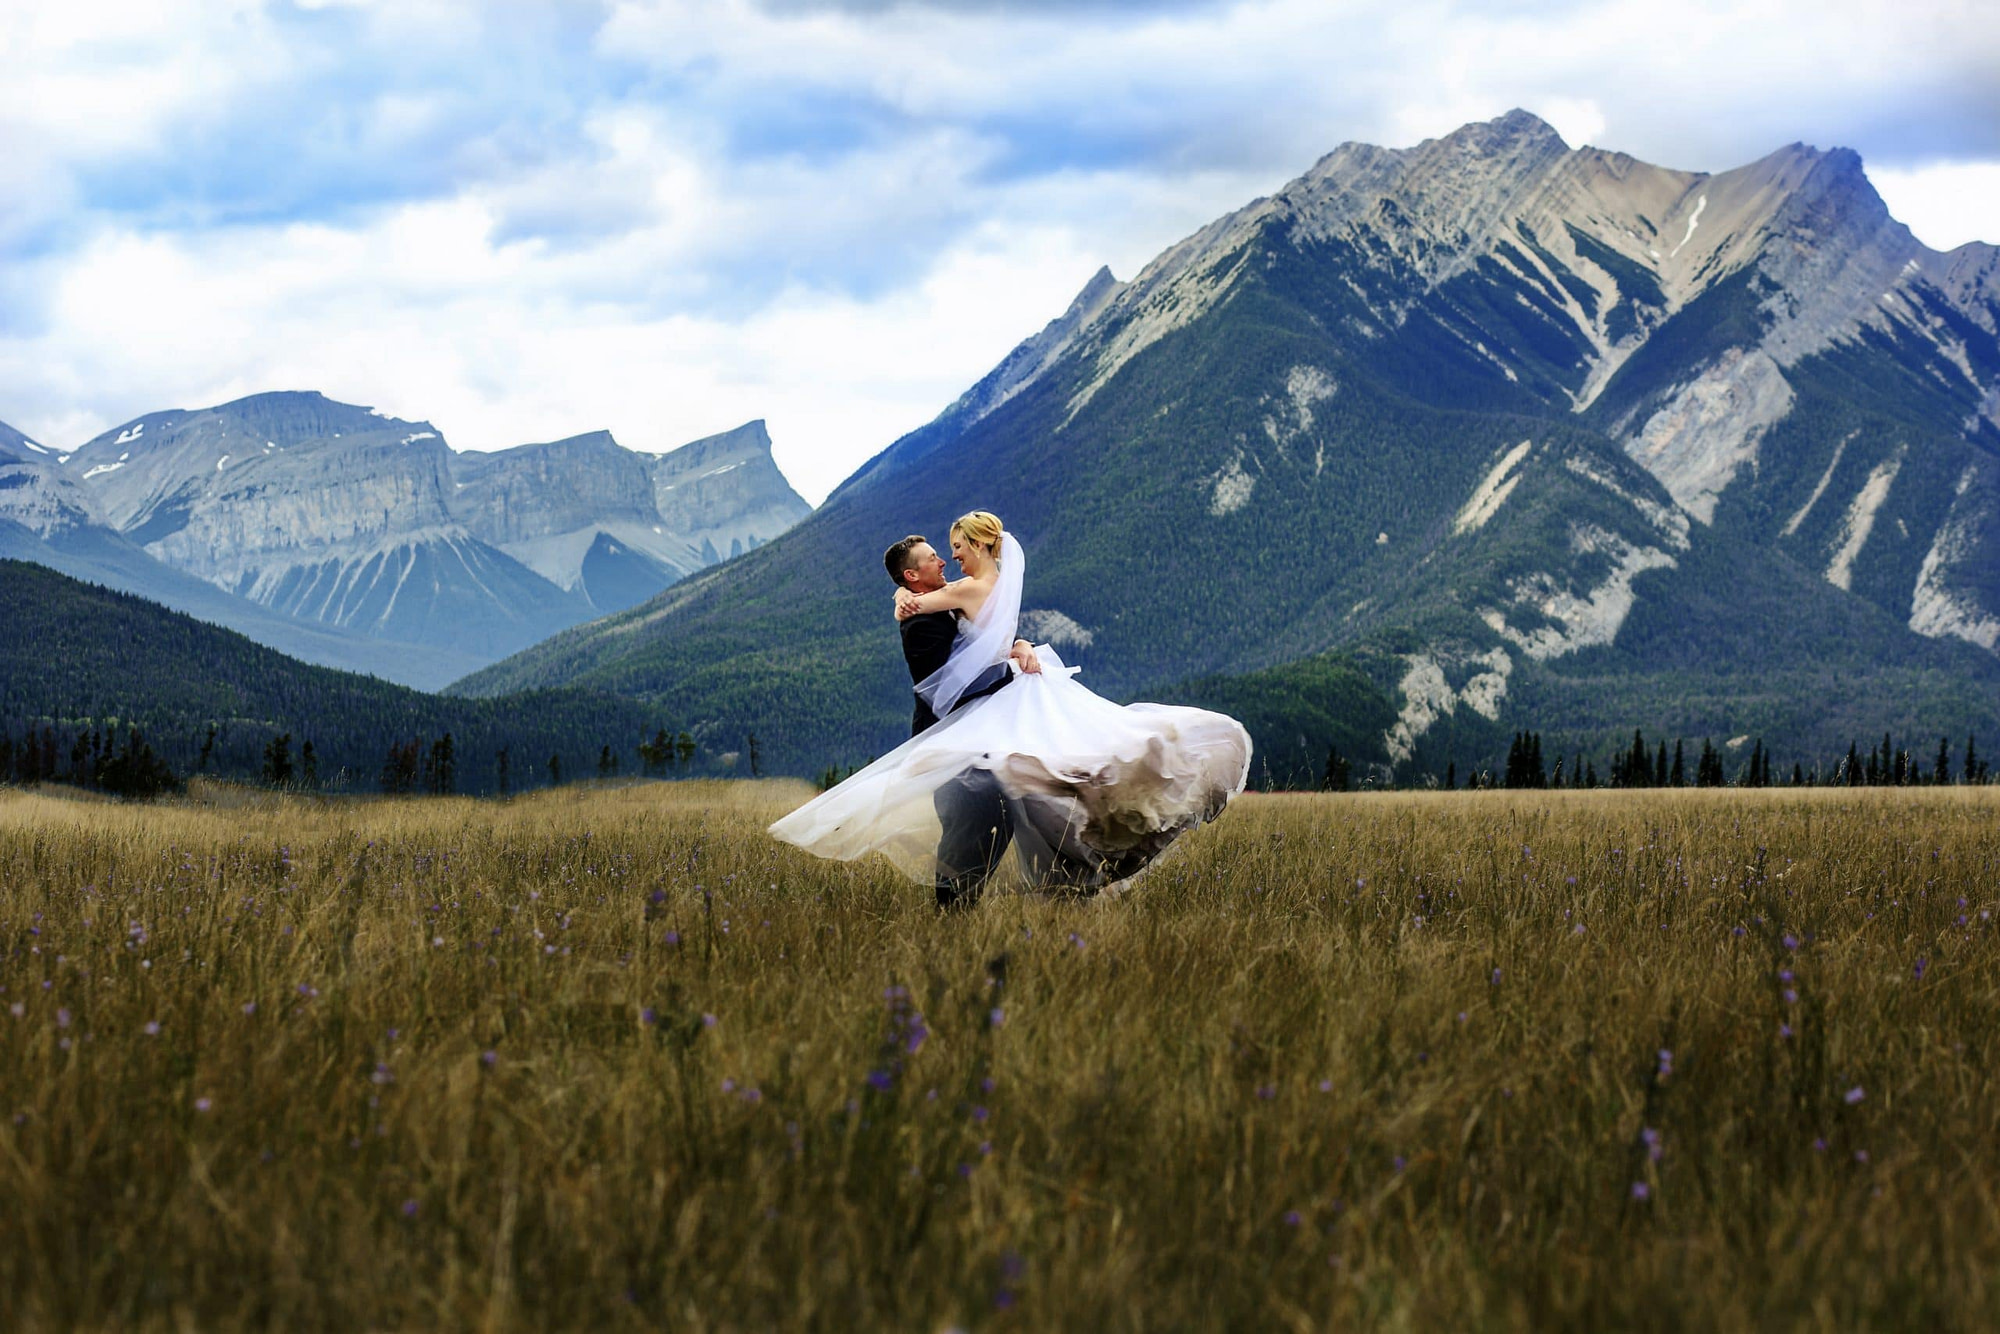 groom lift and spinning bride around in a meadow